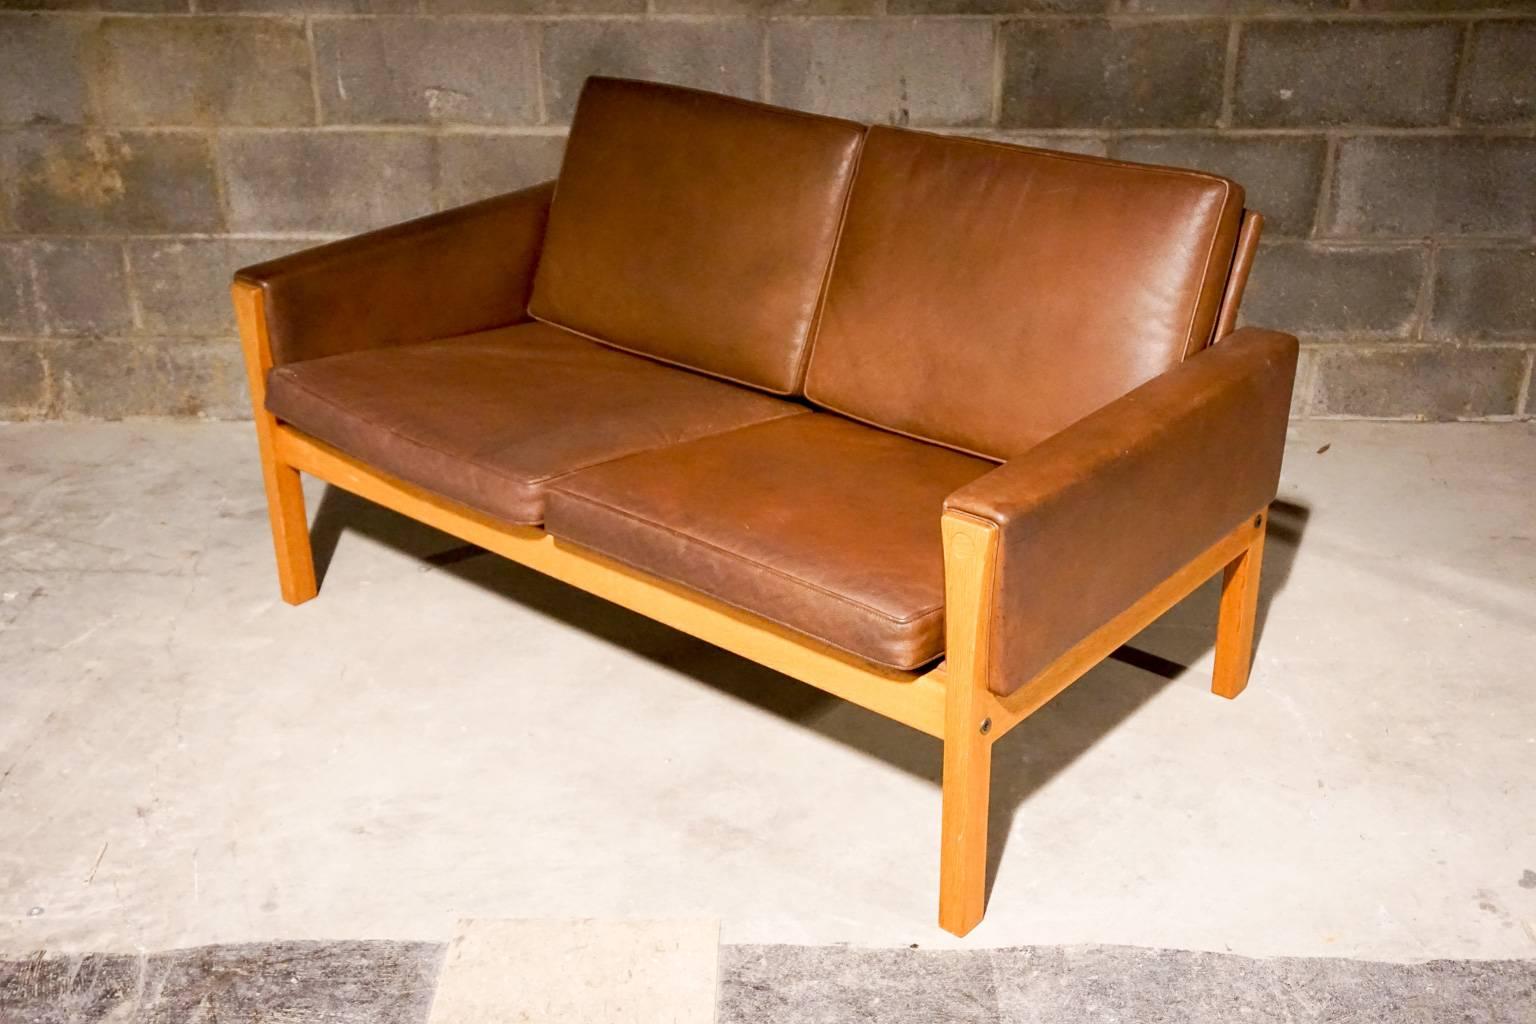 Hans Wegner two-seat sofa, model CH 162. Thick brown leather and oak frame. Superb quality.